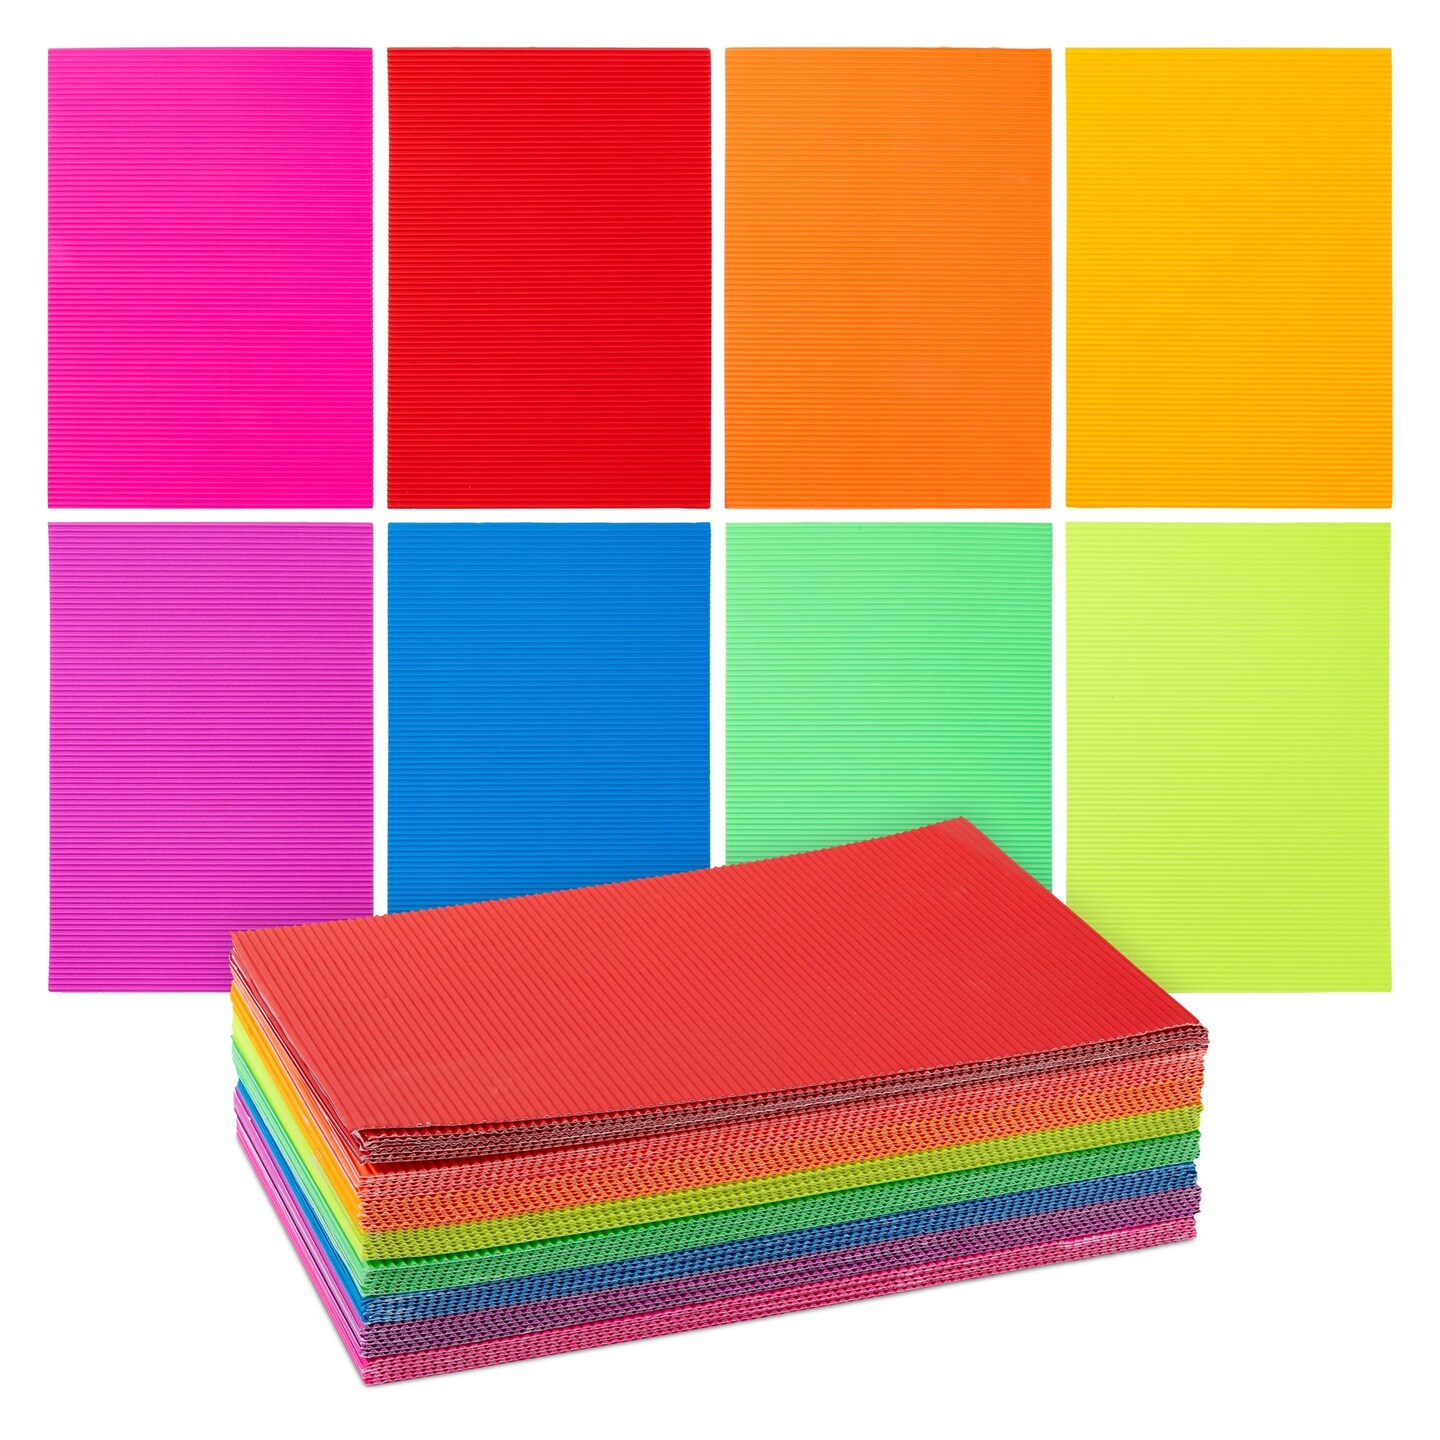 64 Pack Colored Corrugated Cardboard Sheets for Crafts, Art